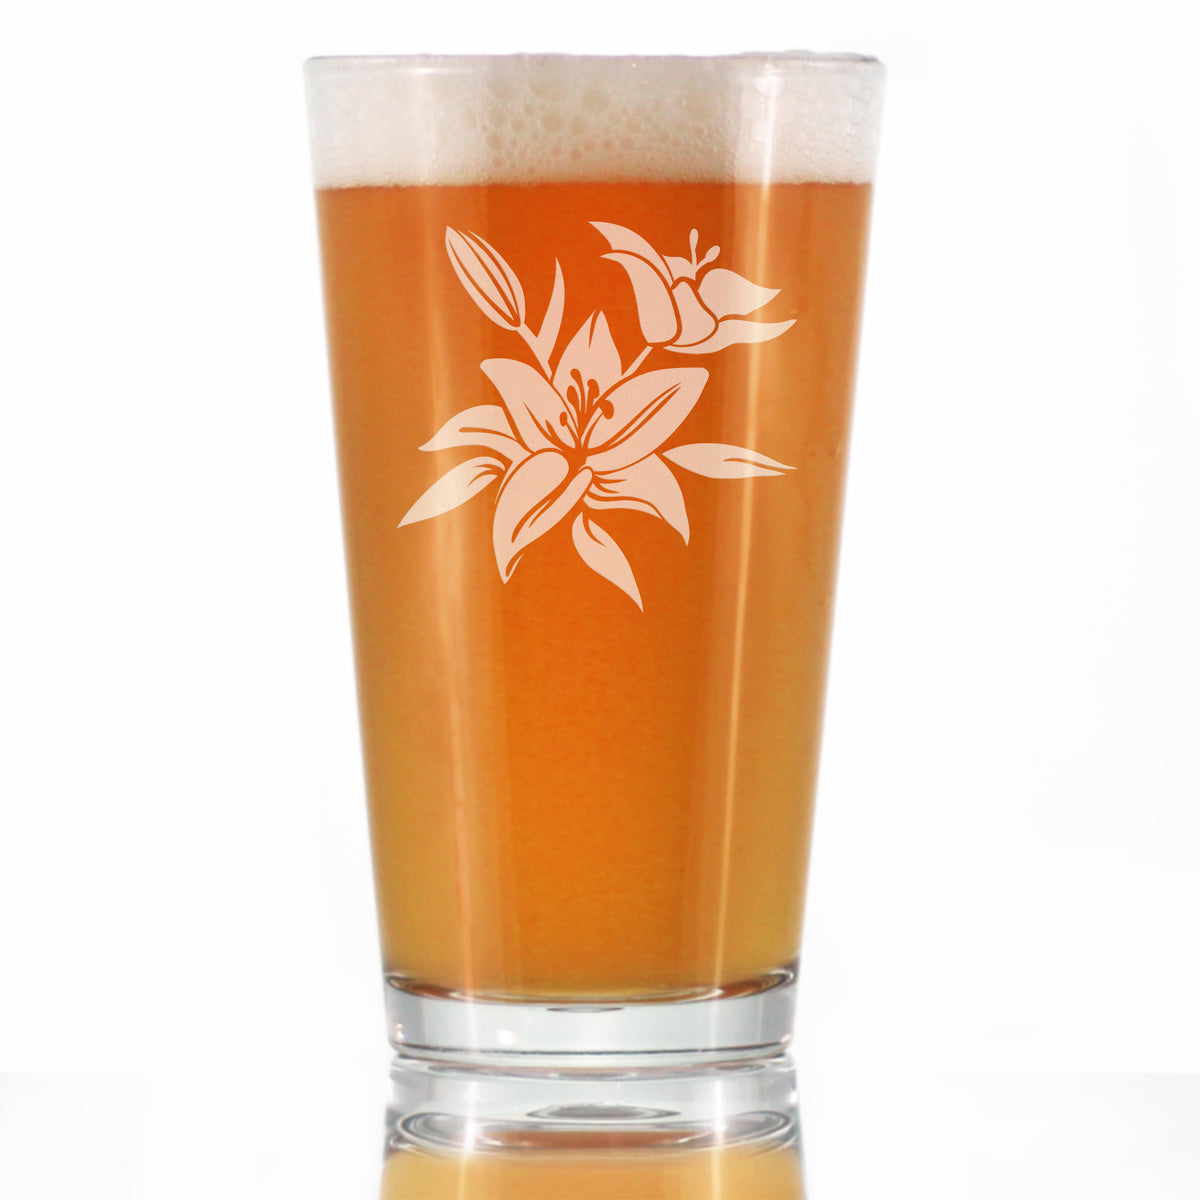 Lily Pint Glass for Beer - Floral Themed Decor and Gifts for Flower Lovers - 16 oz Glasses